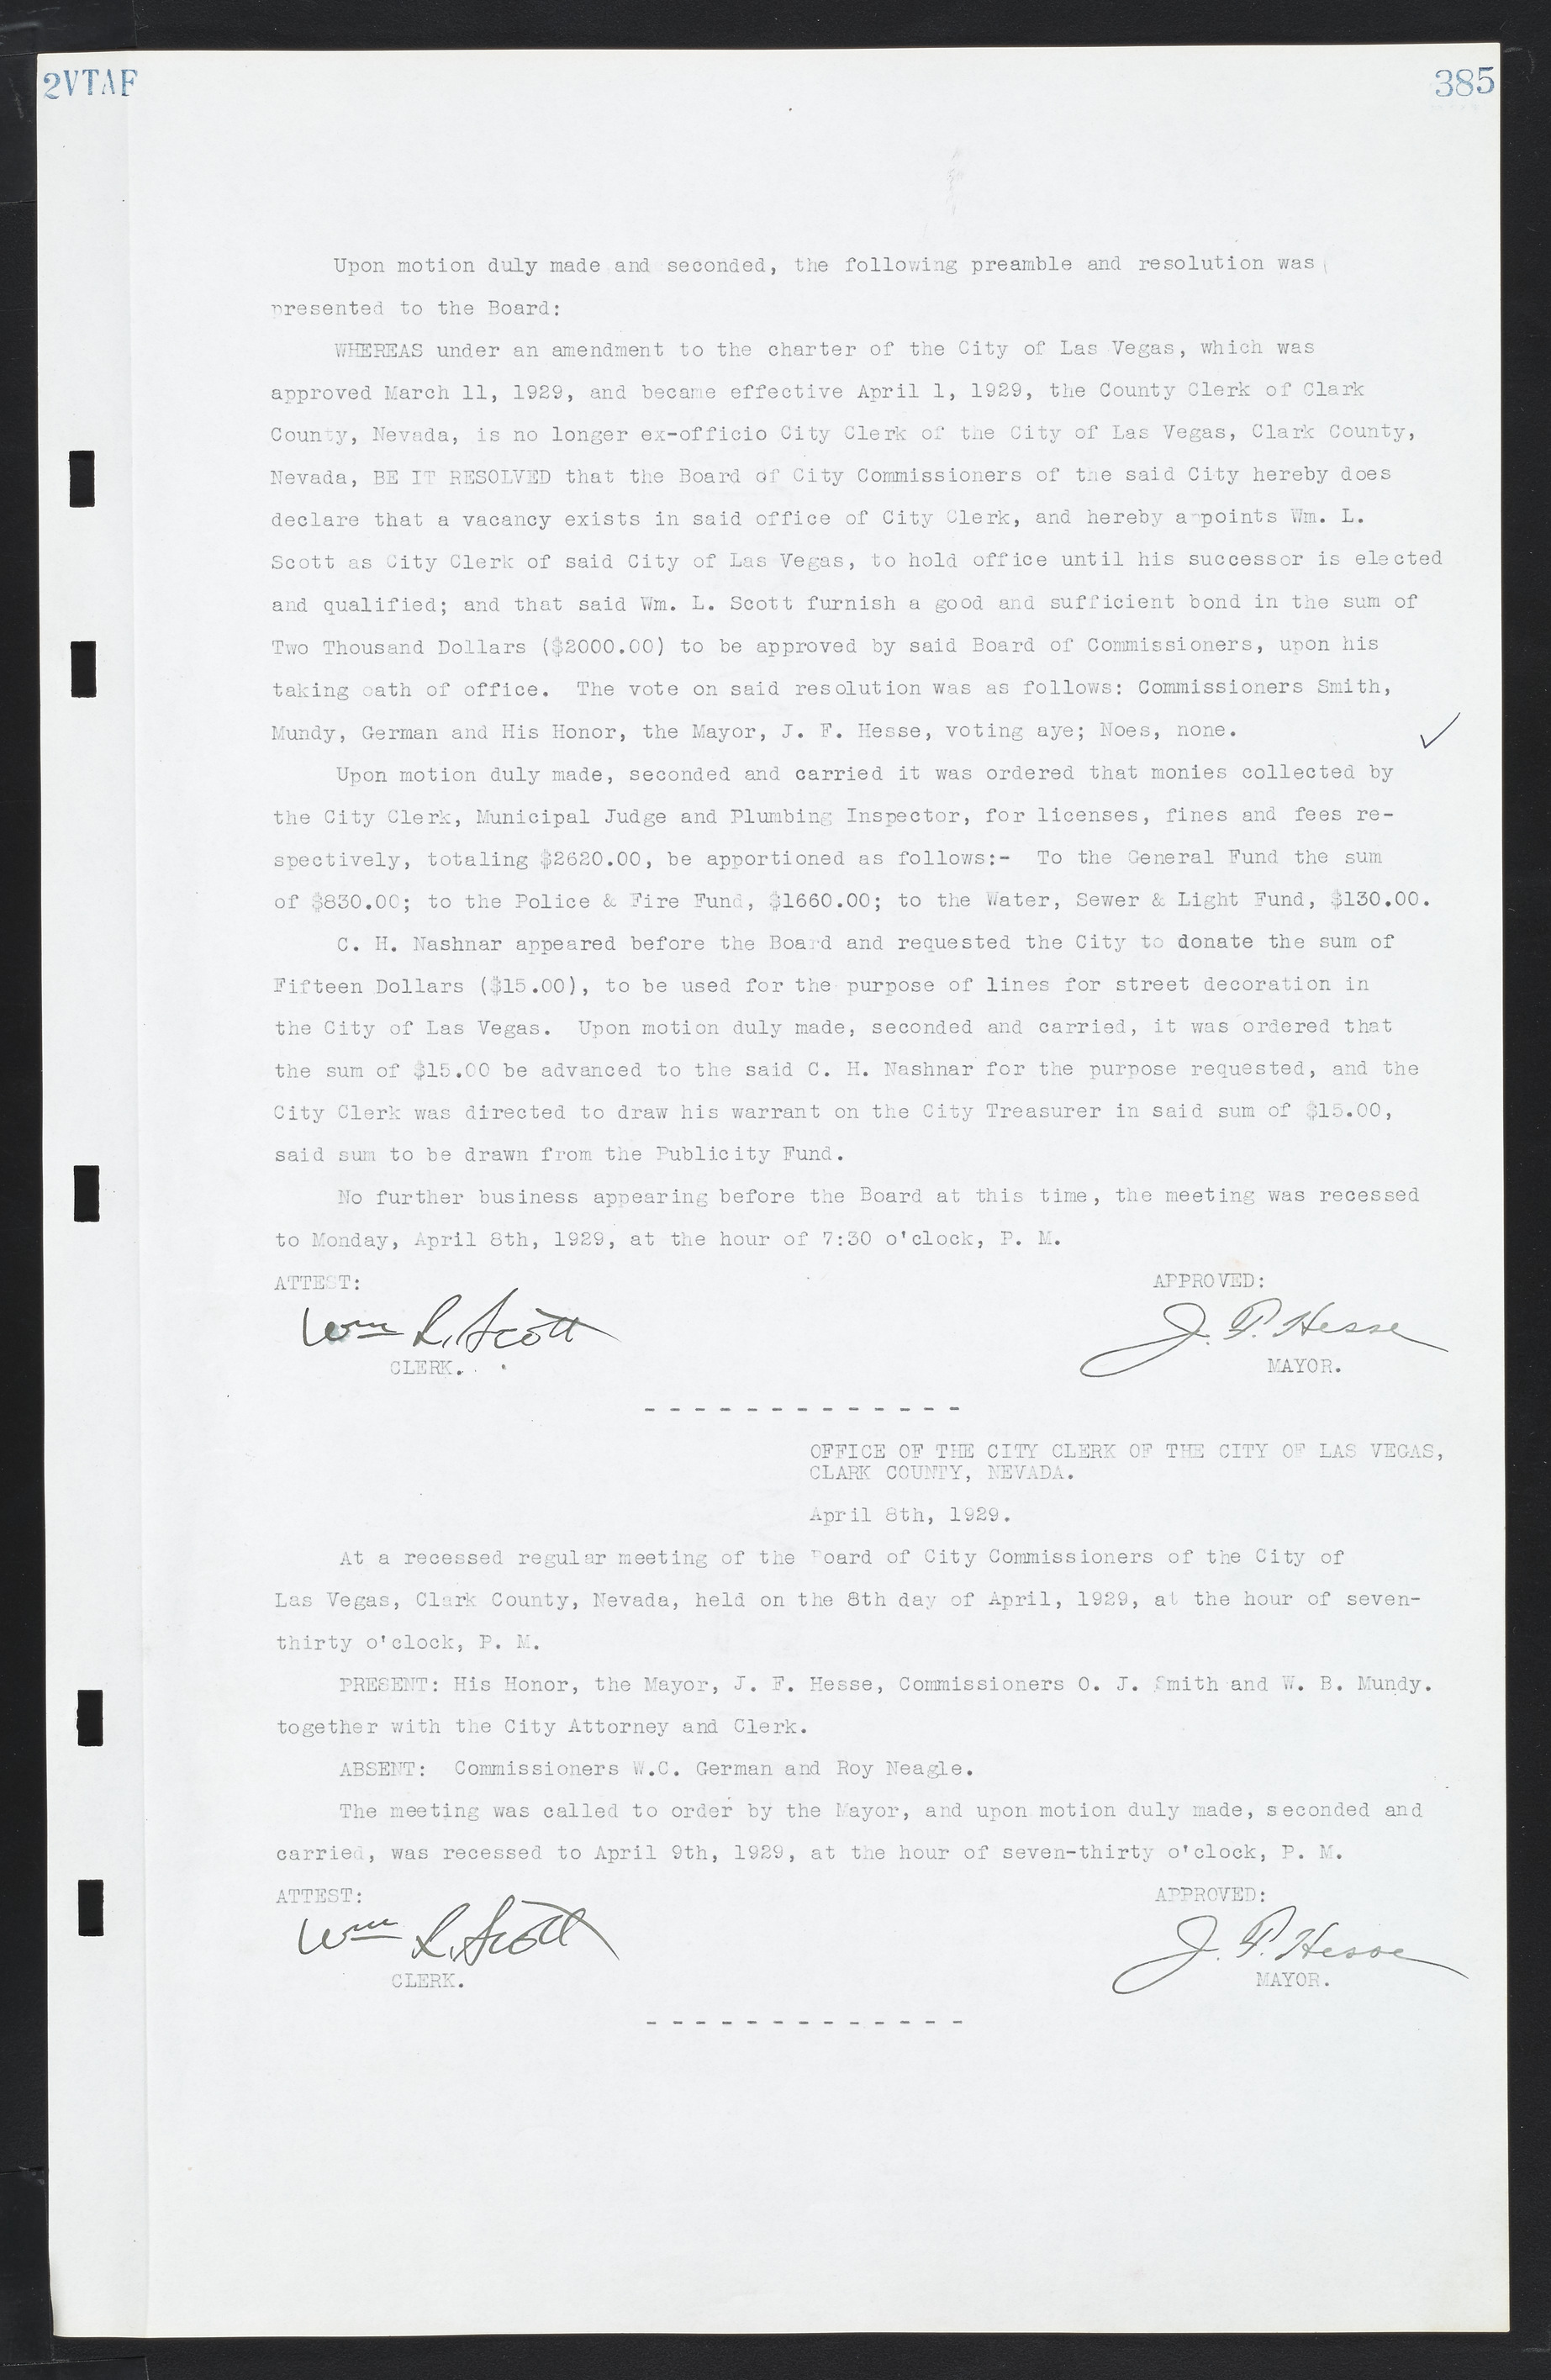 Las Vegas City Commission Minutes, March 1, 1922 to May 10, 1929, lvc000002-394